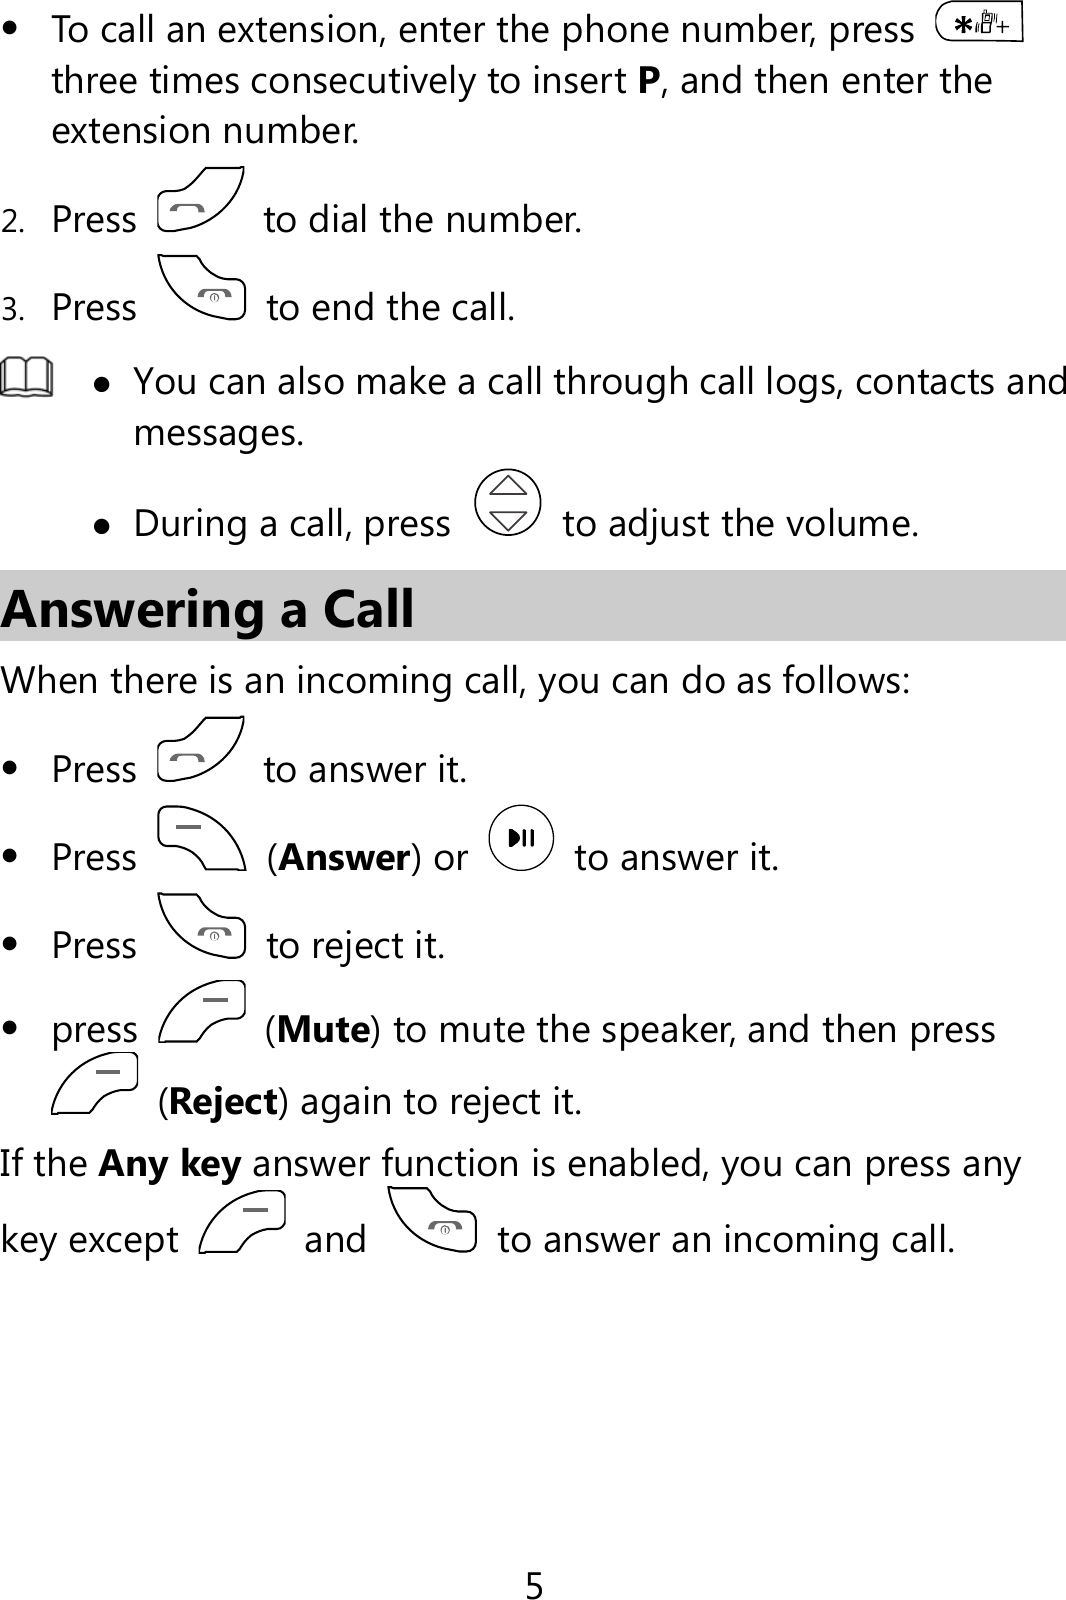 5  To call an extension, enter the phone number, press   three times consecutively to insert P, and then enter the extension number. 2. Press    to dial the number. 3. Press    to end the call.   You can also make a call through call logs, contacts and messages.  During a call, press    to adjust the volume. Answering a Call When there is an incoming call, you can do as follows:  Press    to answer it.  Press   (Answer) or    to answer it.  Press   to reject it.  press   (Mute) to mute the speaker, and then press  (Reject) again to reject it. If the Any key answer function is enabled, you can press any key except  and    to answer an incoming call.  